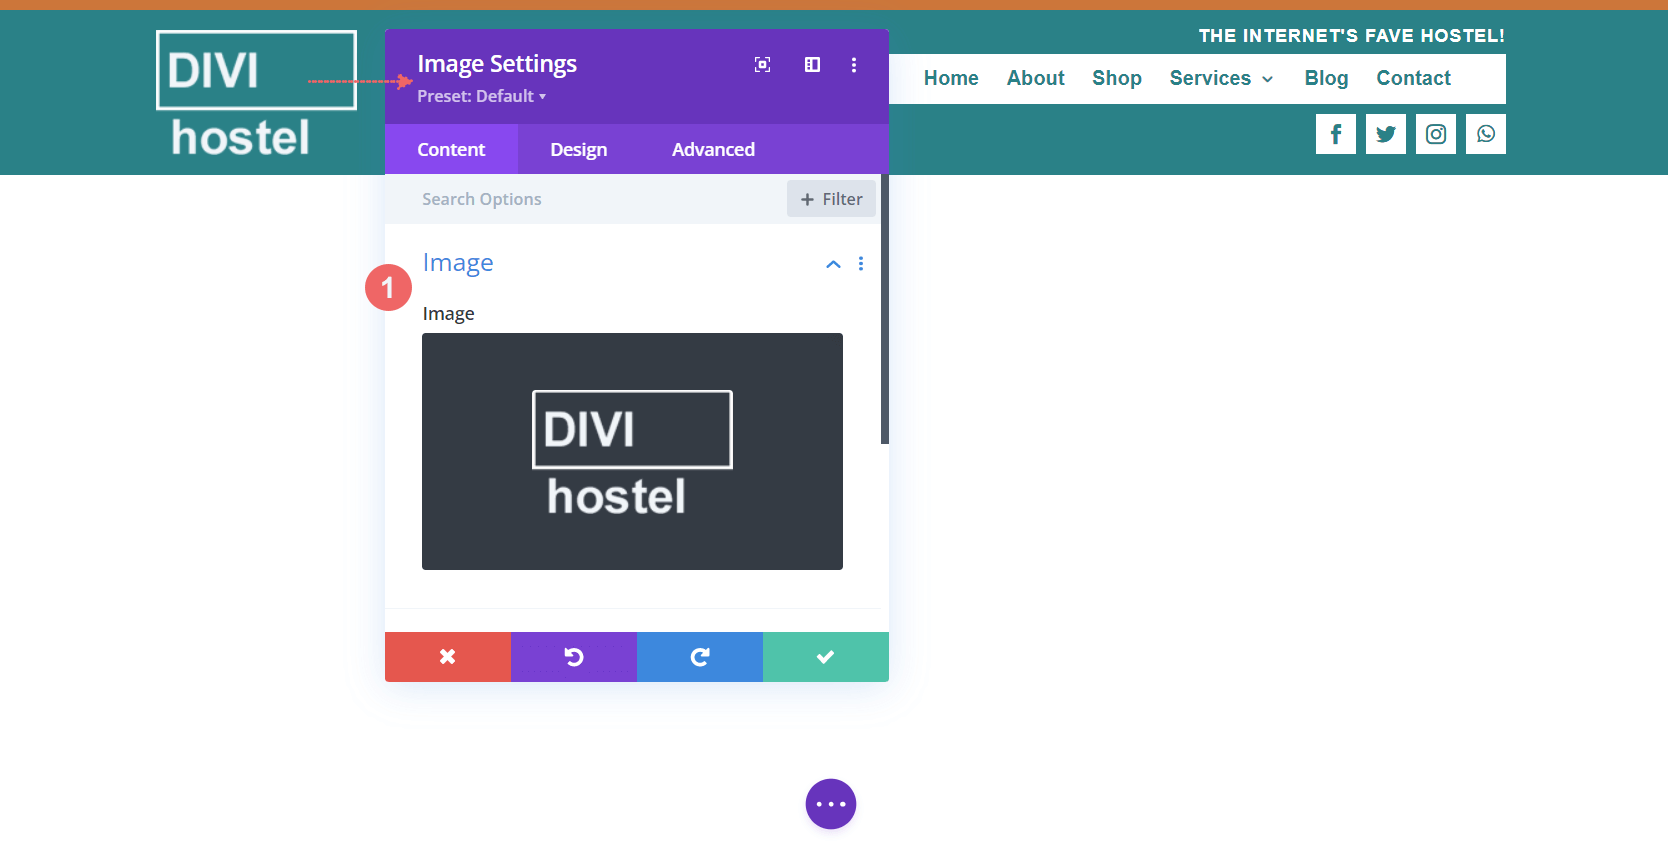 Update and add your logo into the Image Module